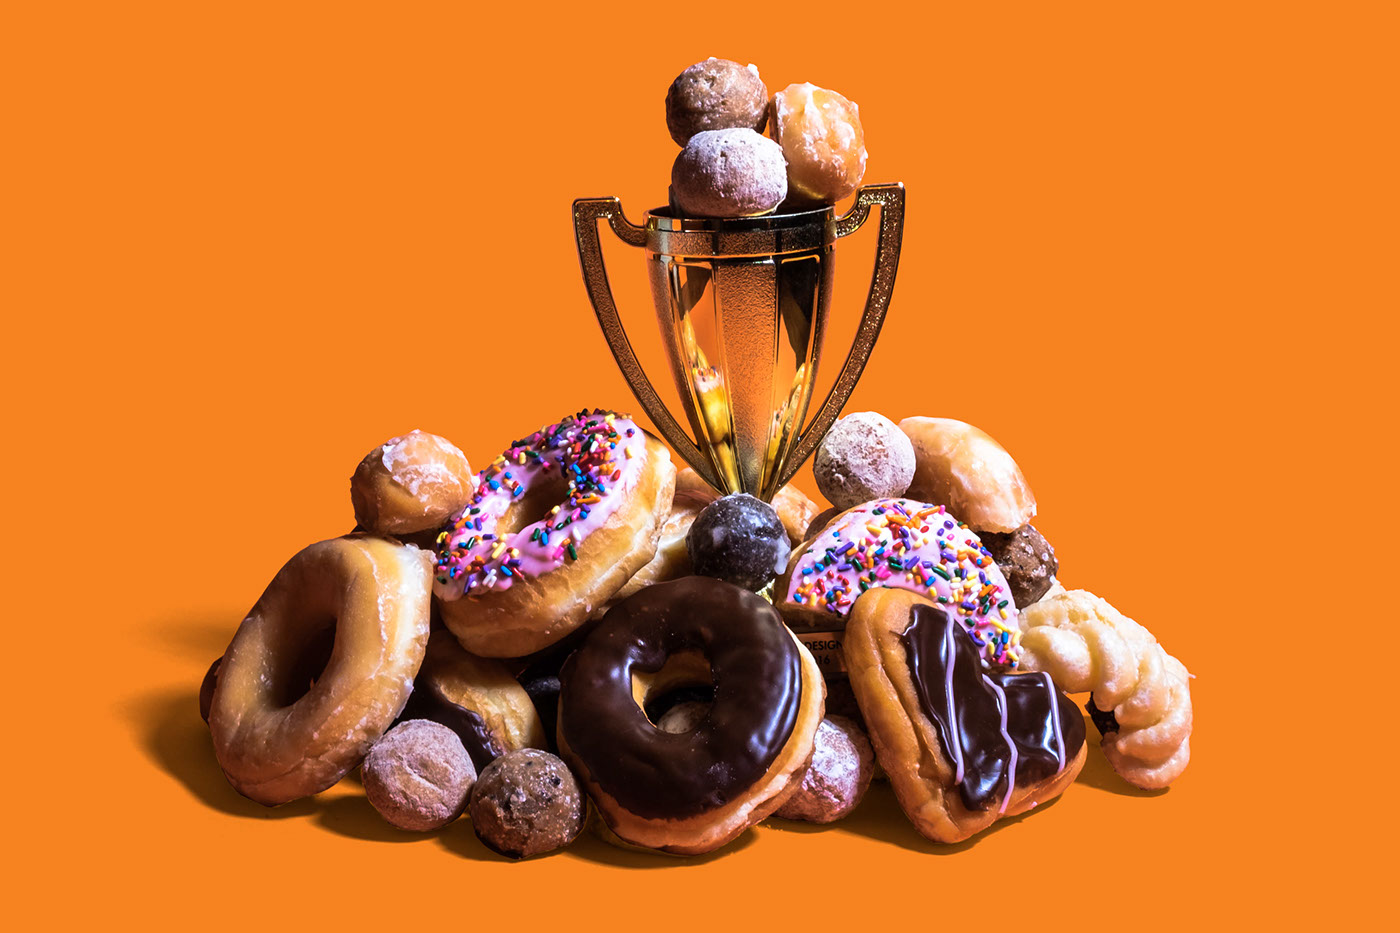 art direction  set design  Photography  Food  Donuts editorial